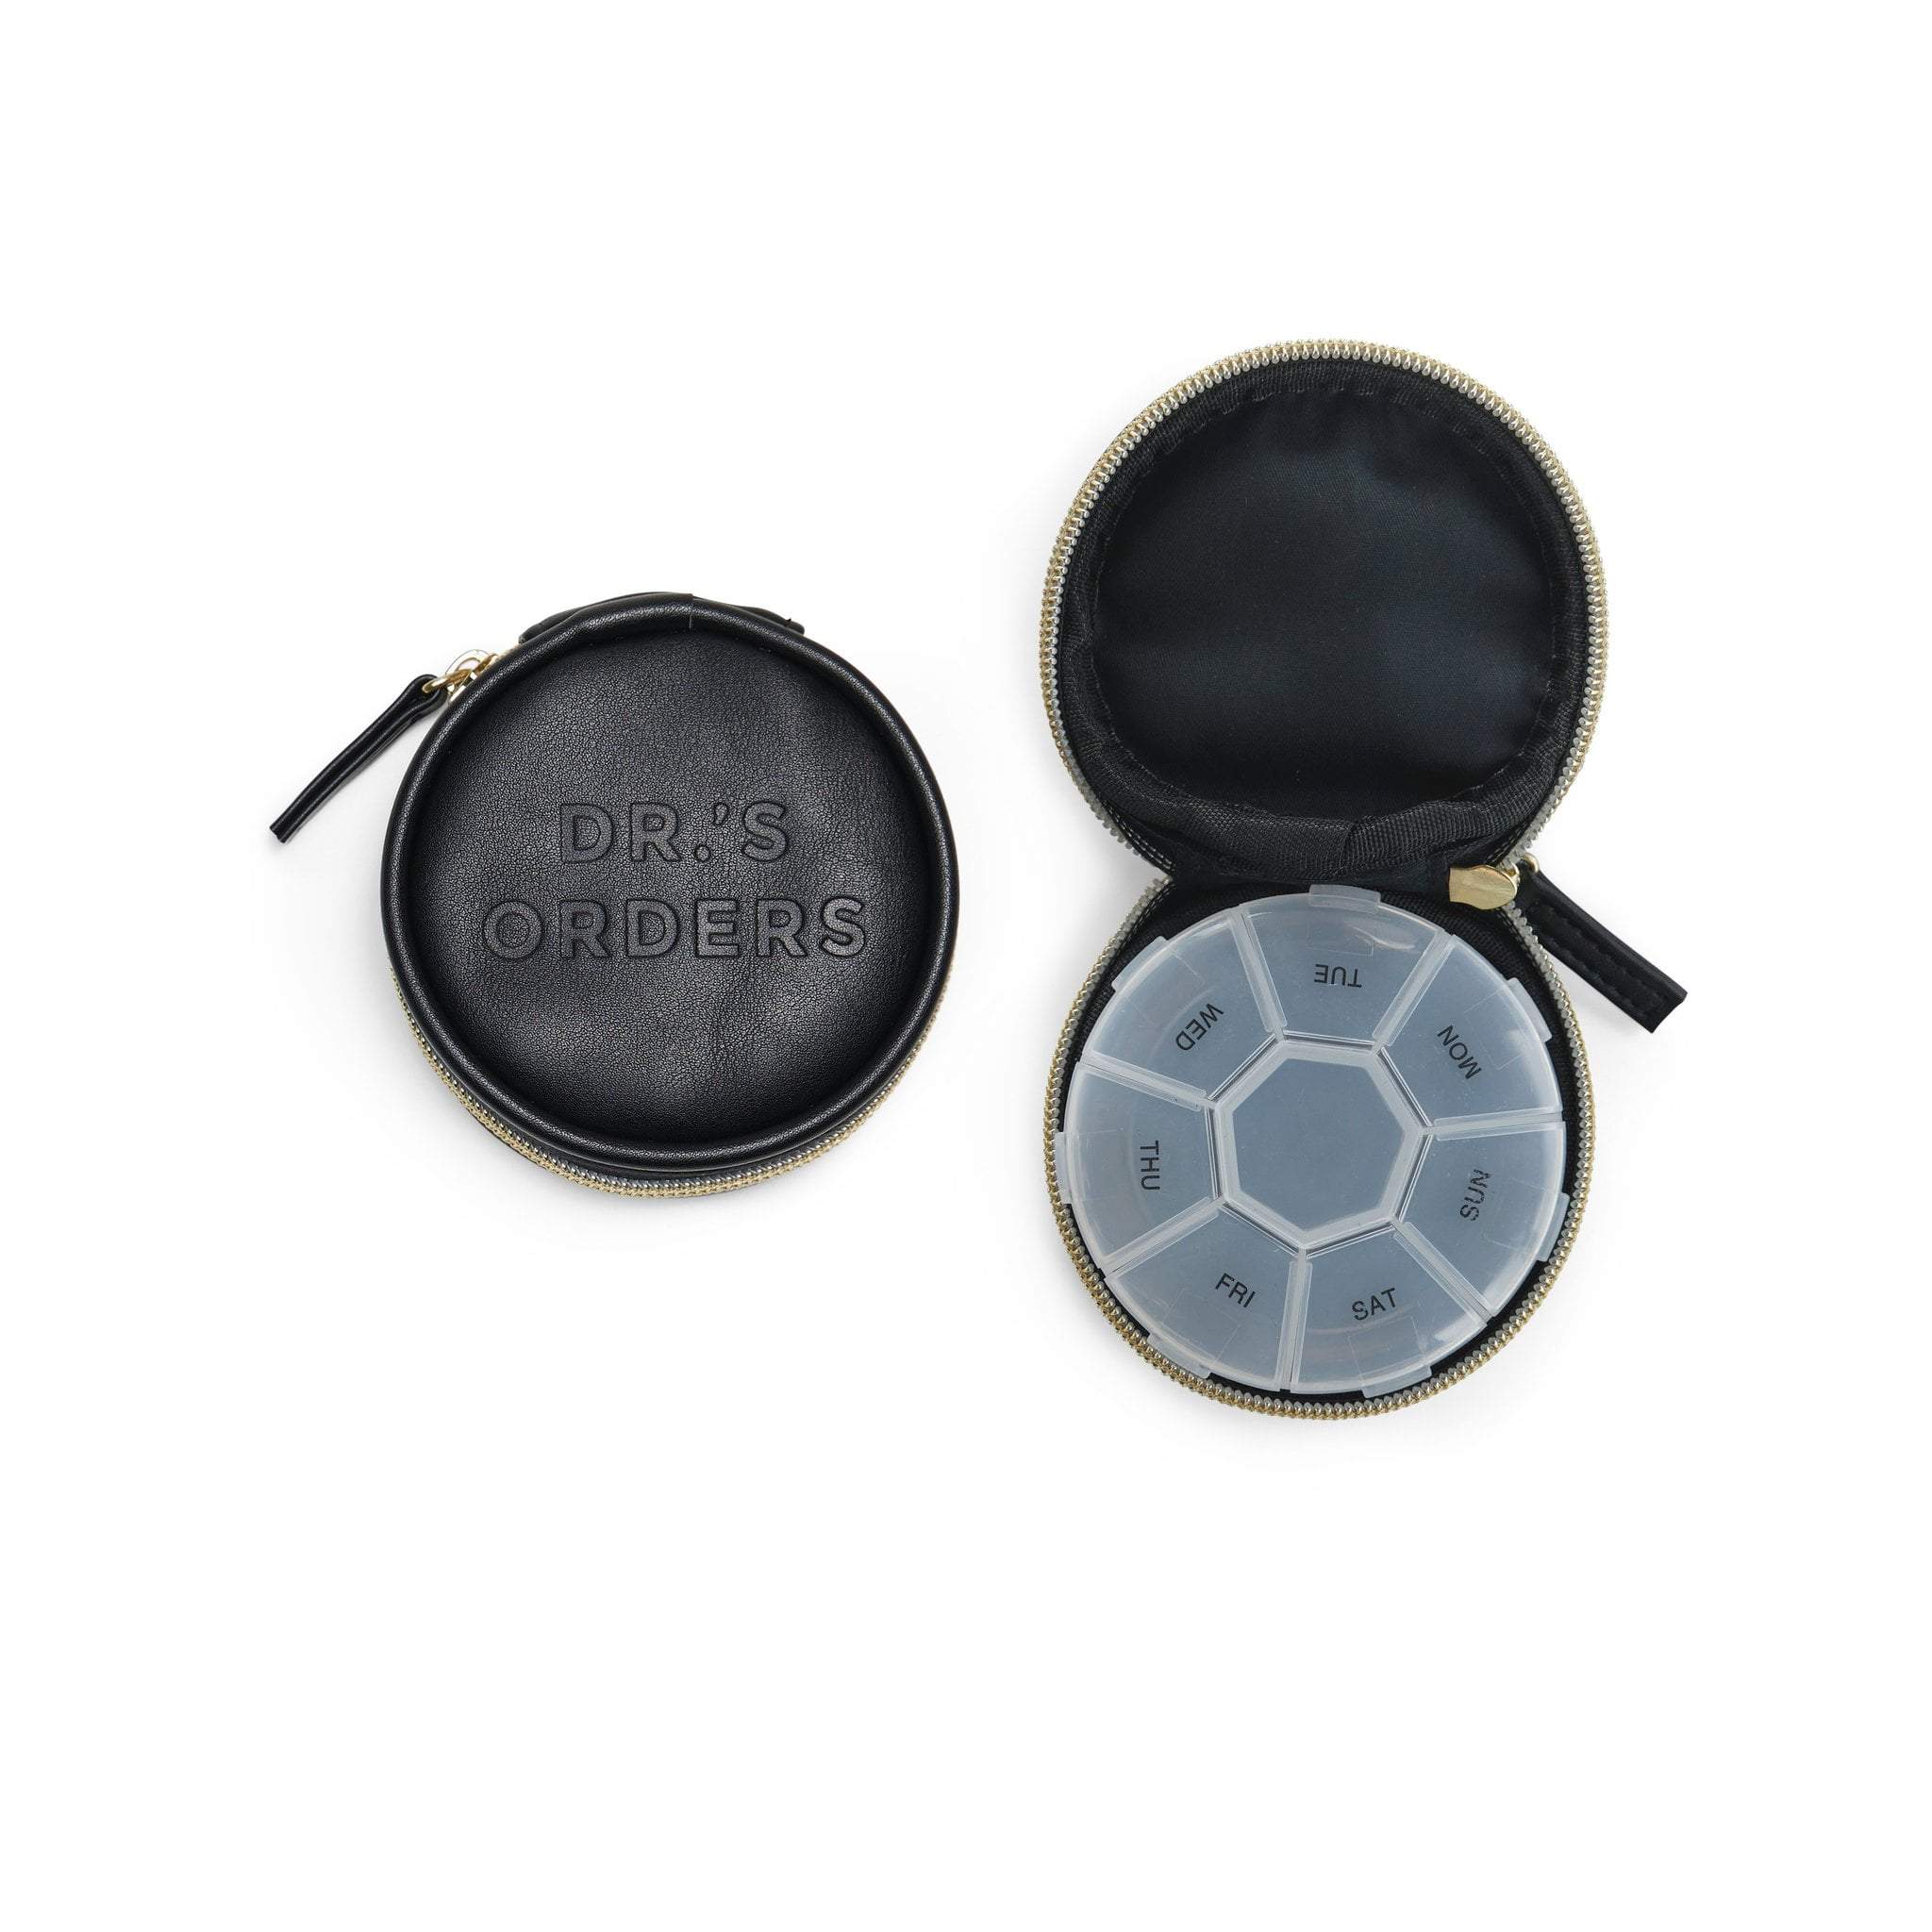 Vegan Leather Pill Box | Dr.'s Orders